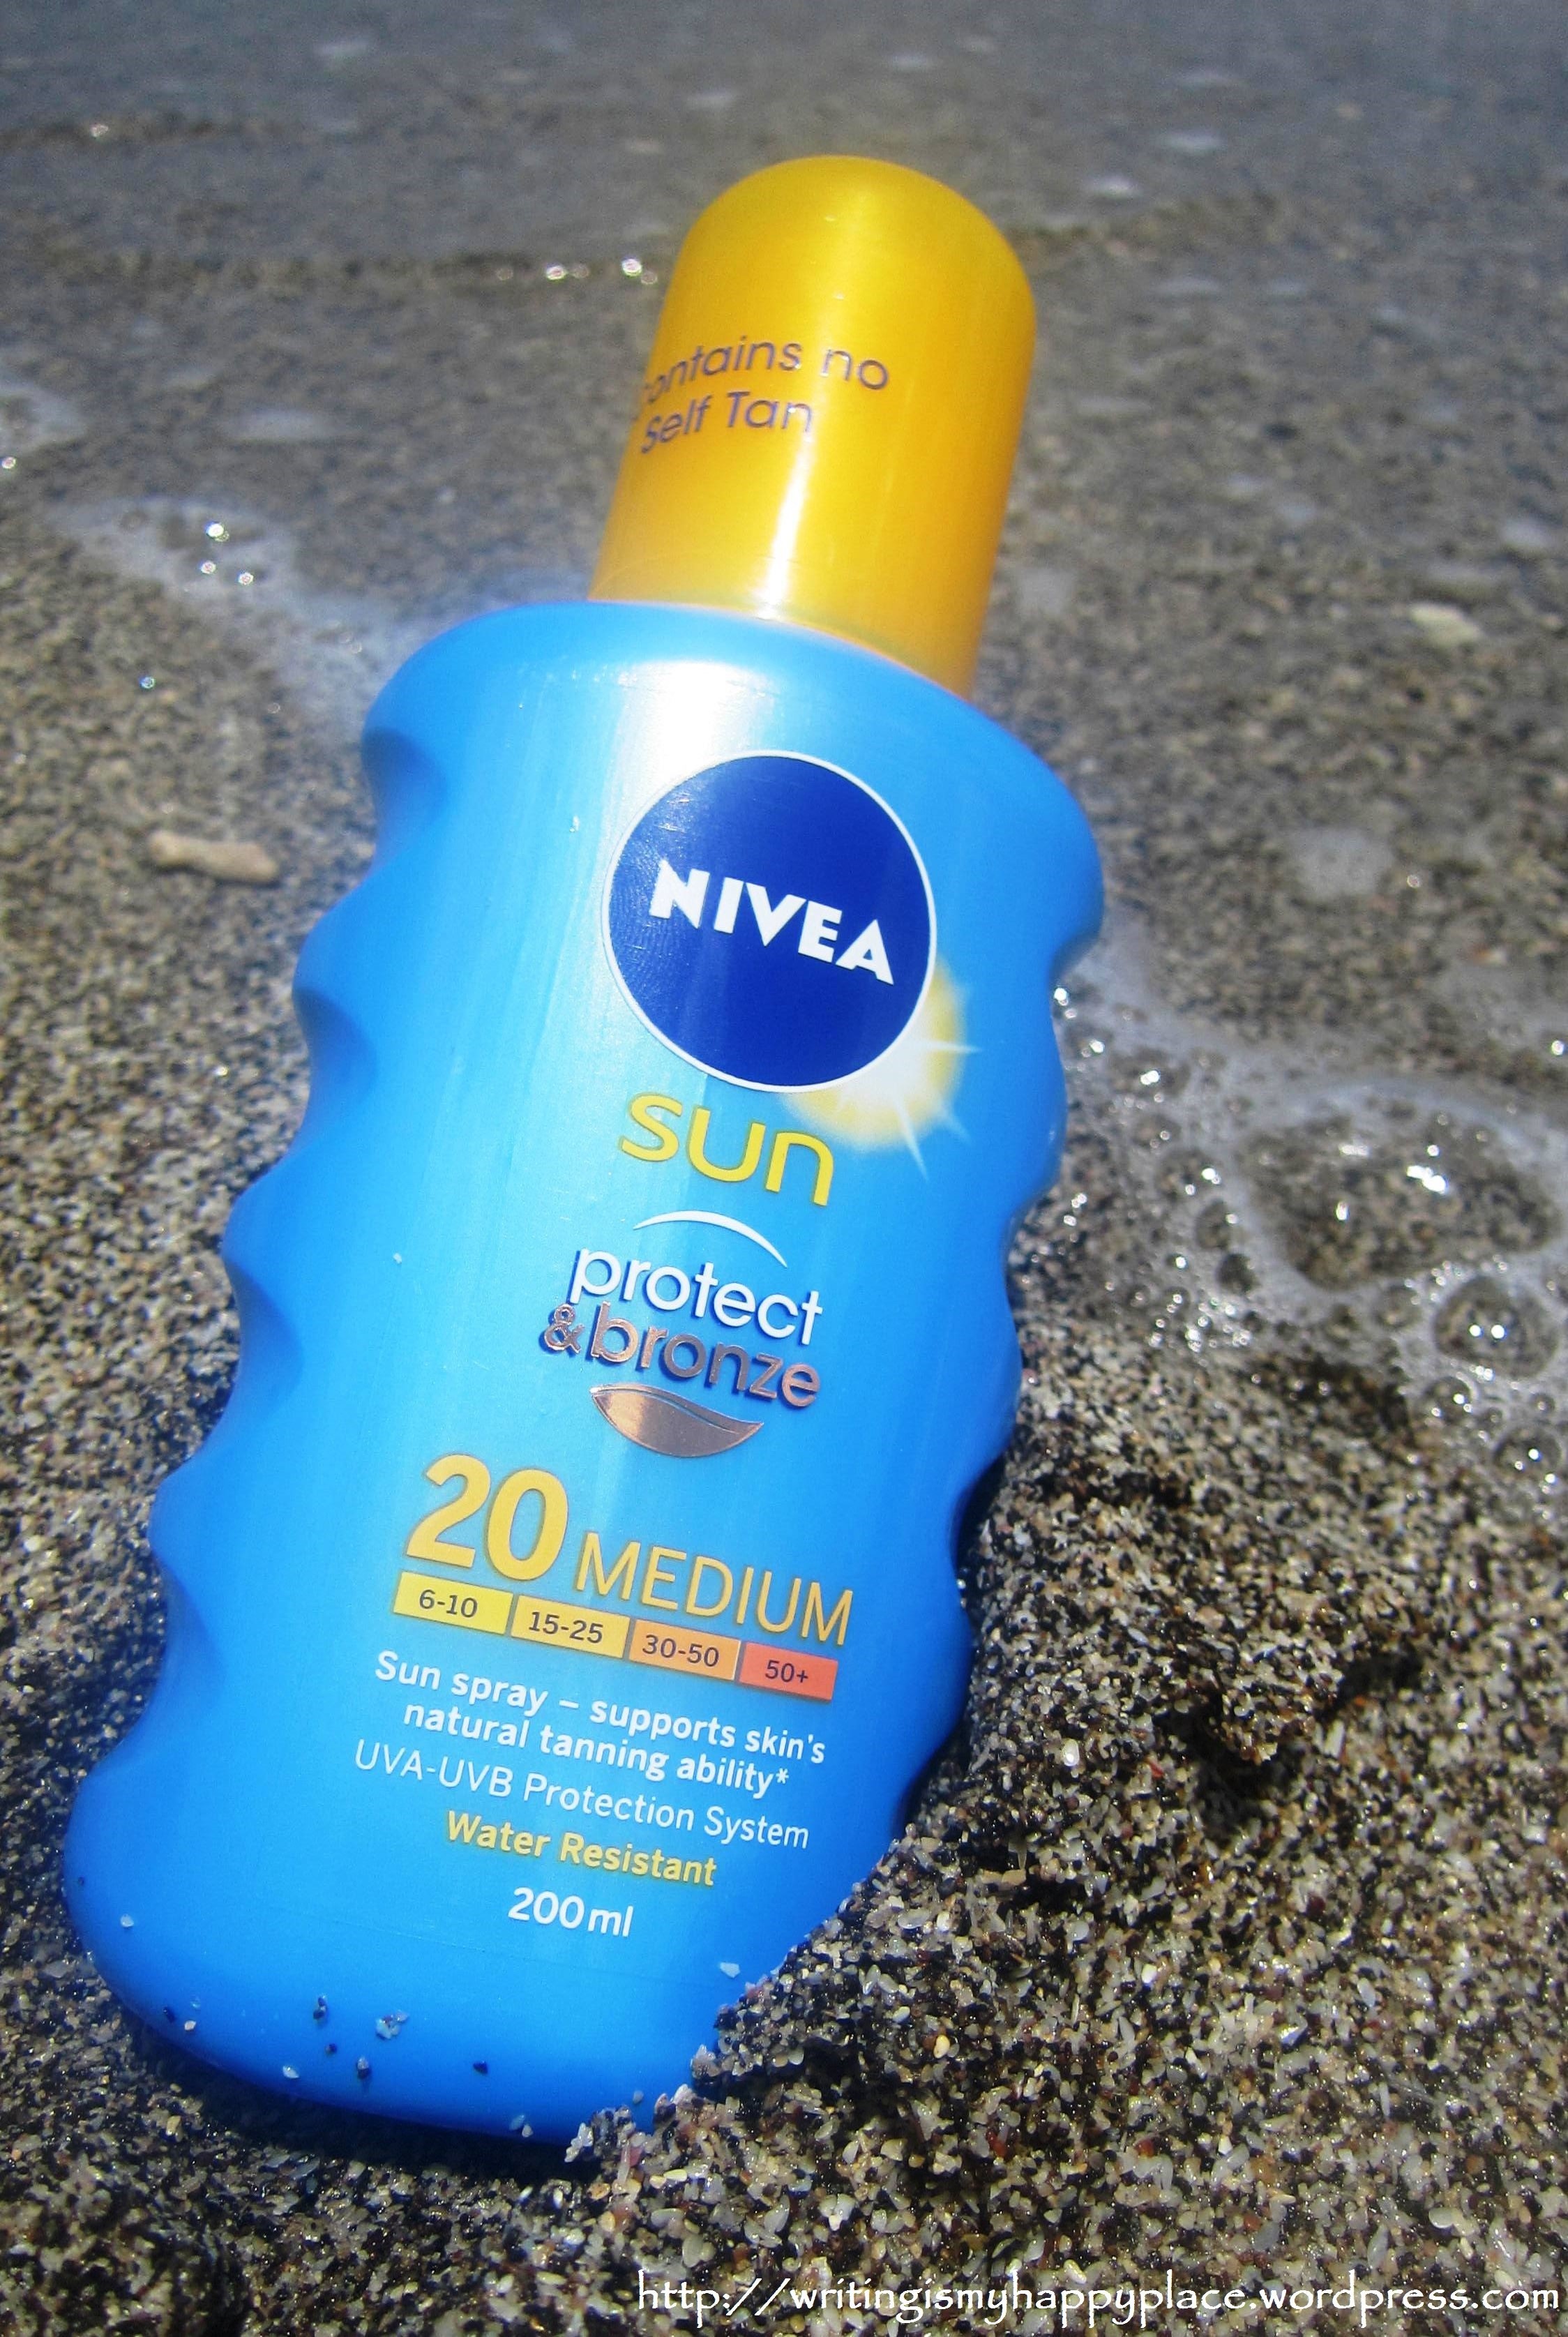 Terzijde pad opladen Nivea Sun Protect and Bronze Spray SPF 20 | Safe and Tanned Under the Sun |  writingismyhappyplace